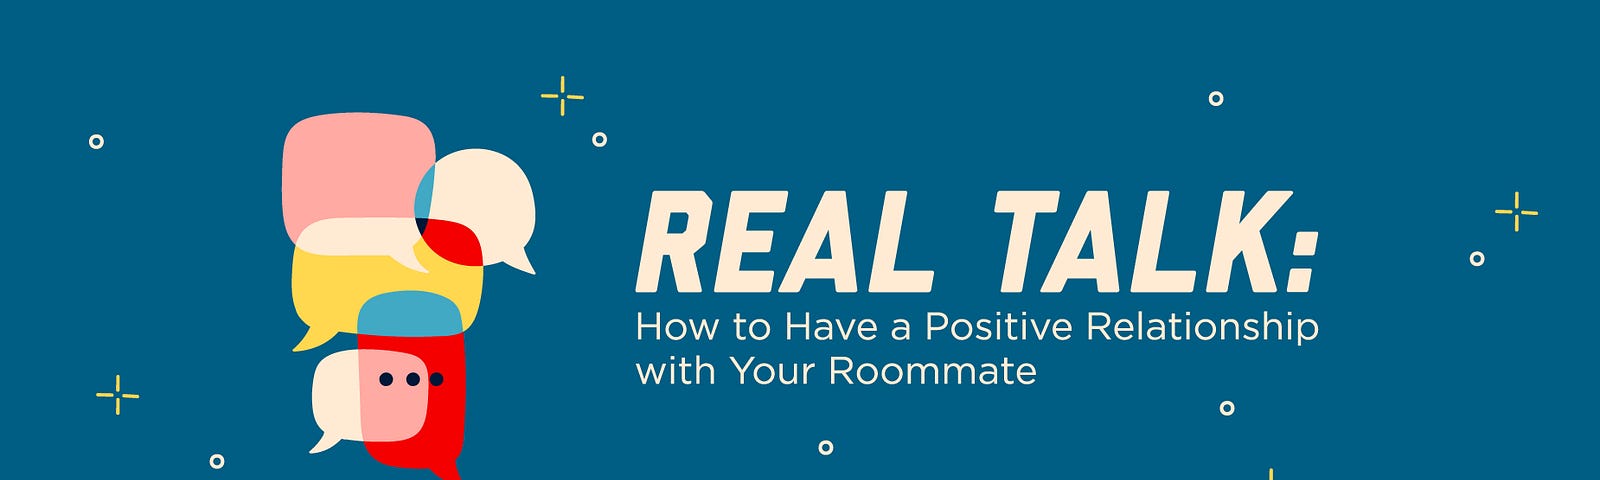 An illustration of overlapping talk bubbles with the text “Real Talk: How to Have a Positive Relationship with Your Roommate”